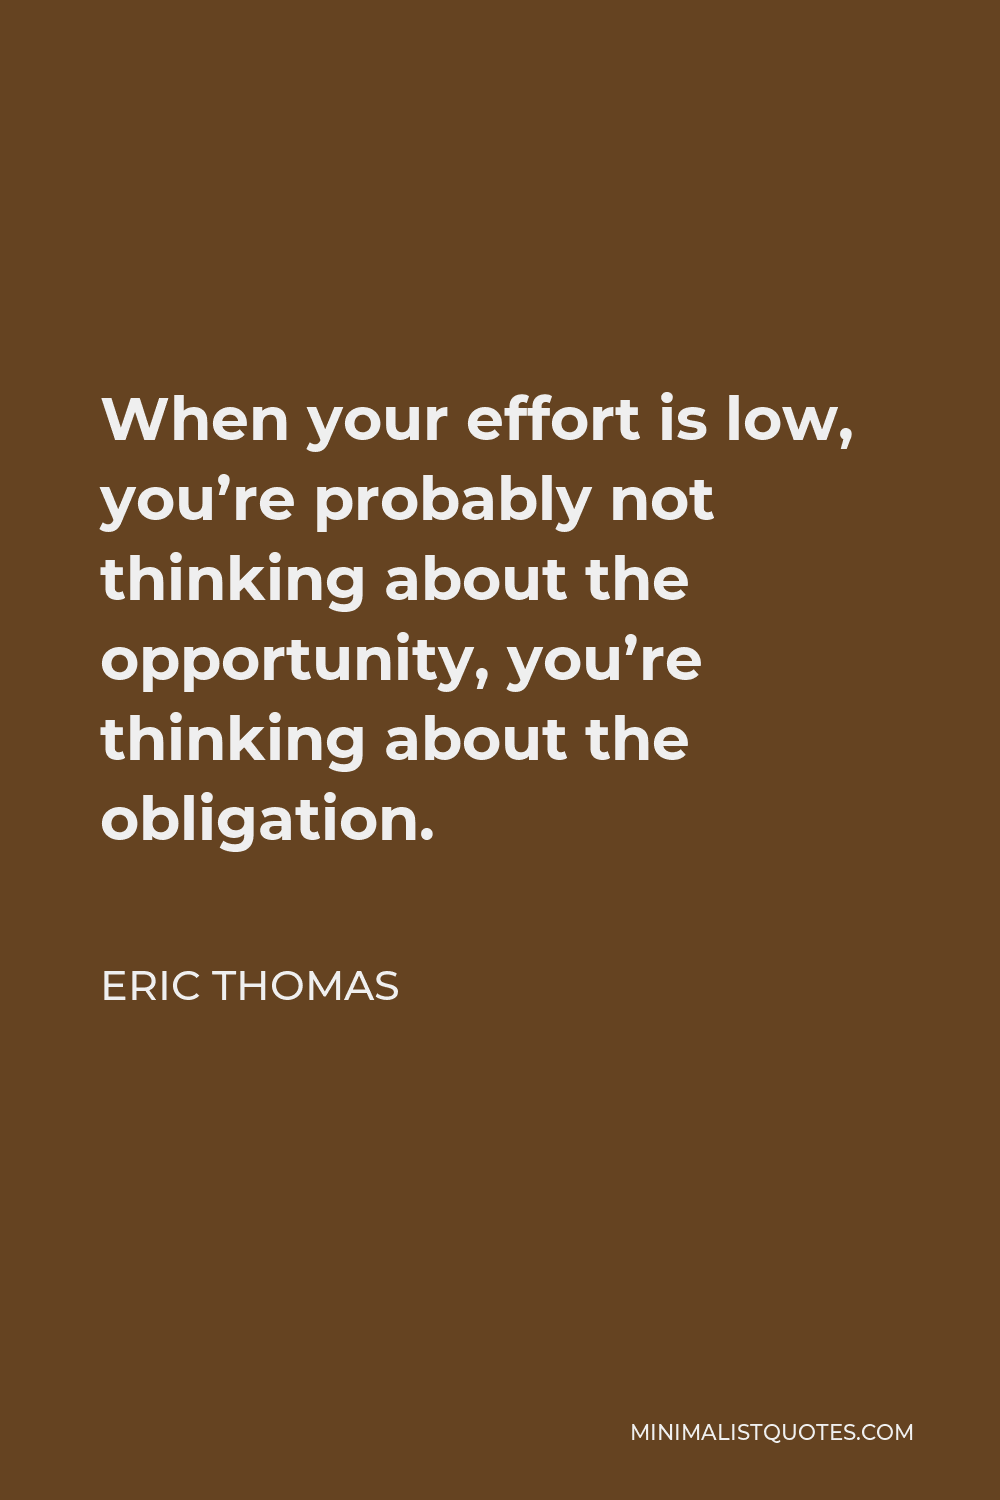 Eric Thomas Quote - When your effort is low, you’re probably not thinking about the opportunity, you’re thinking about the obligation.